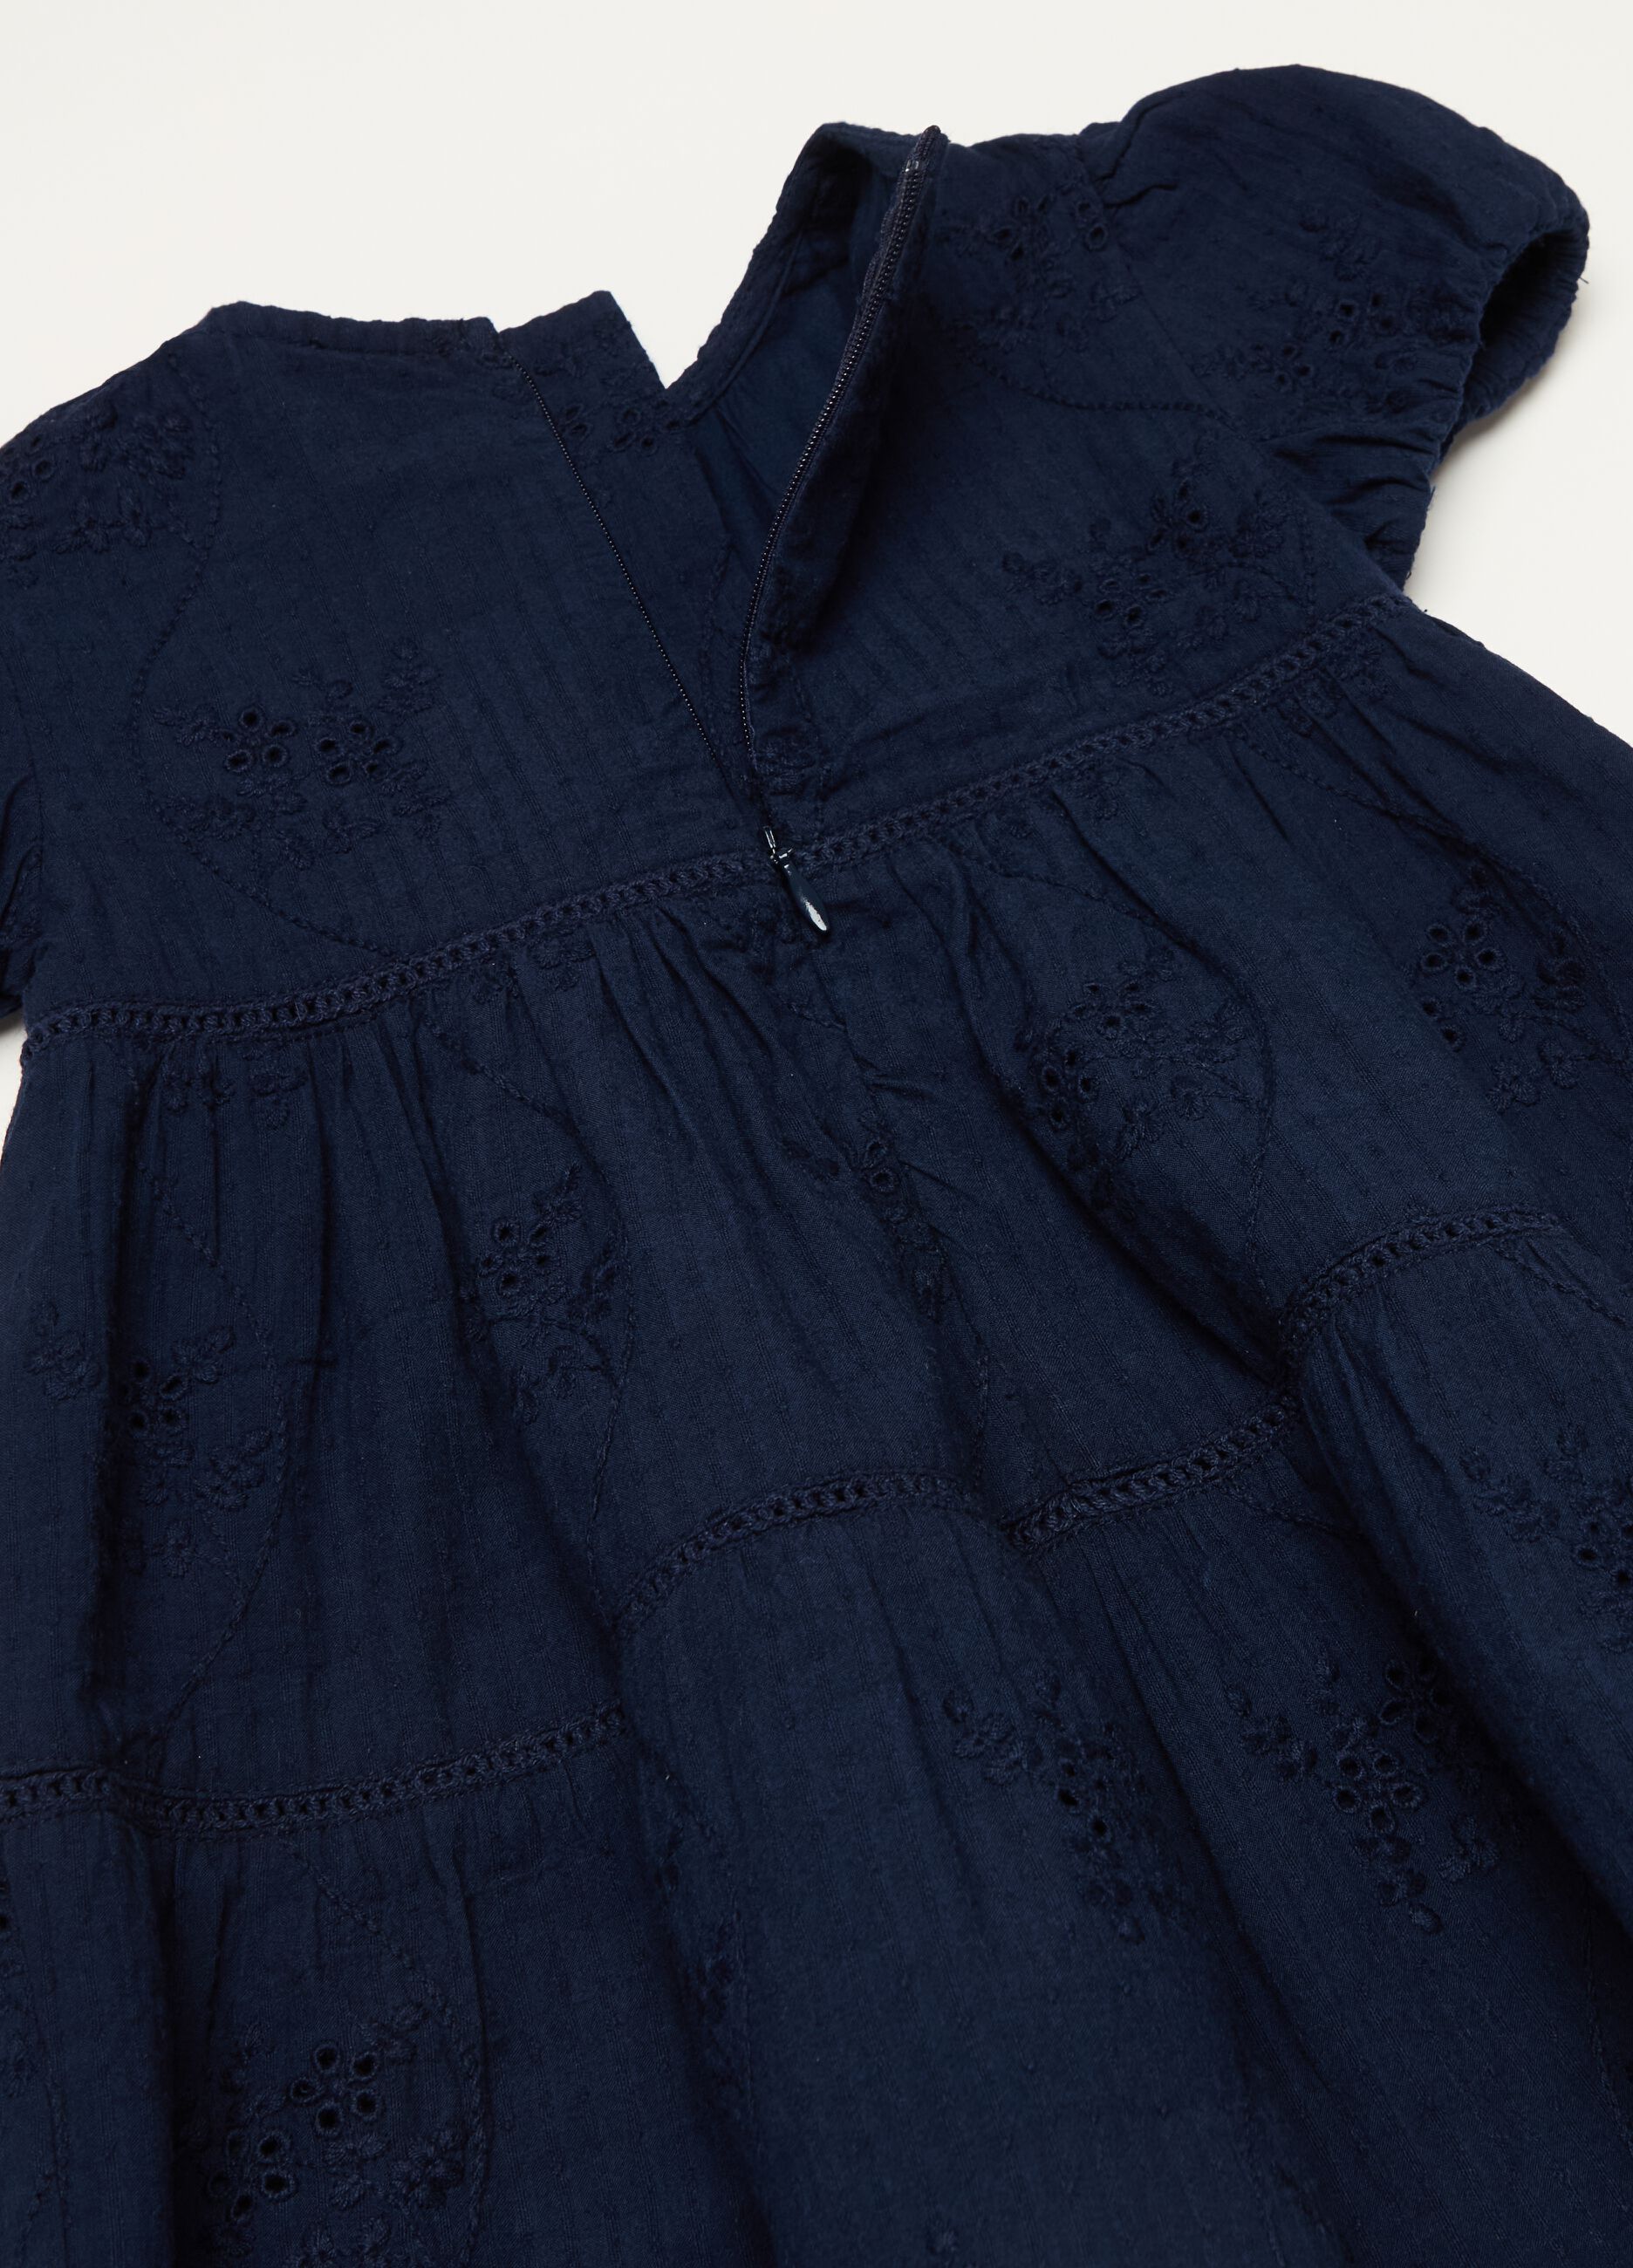 Tiered dress in cotton broderie anglaise